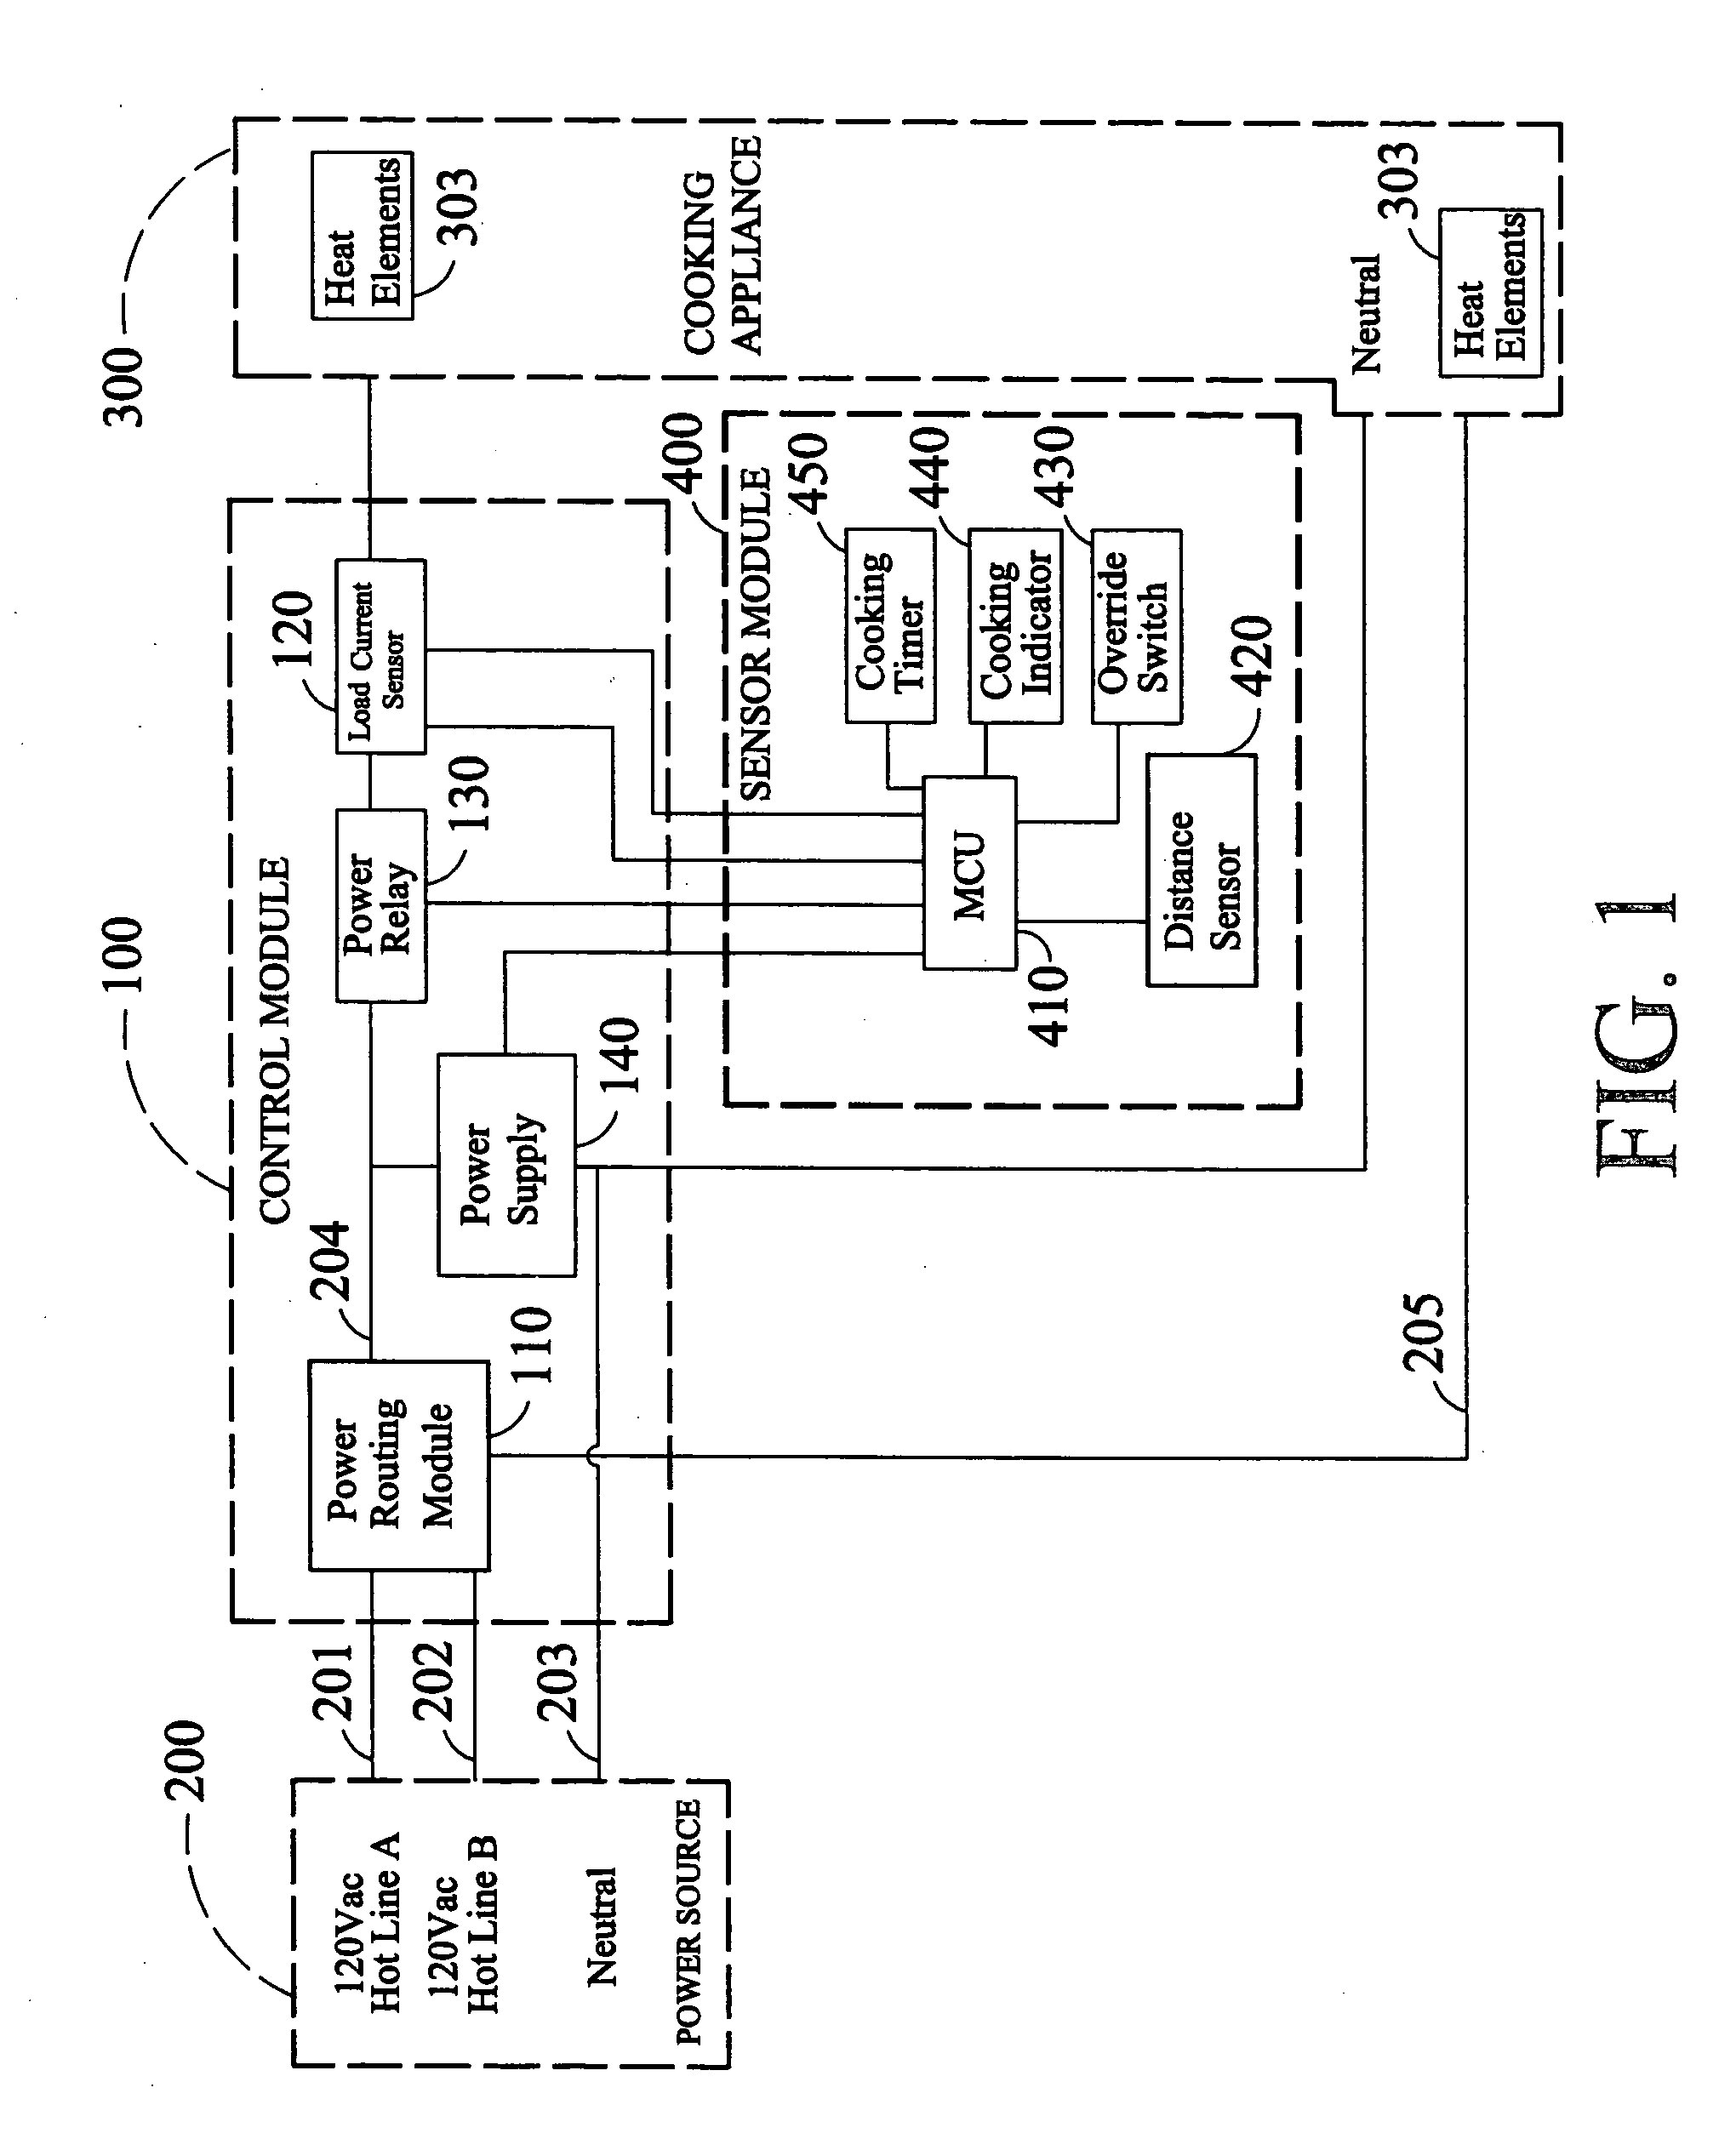 Safety device for regulating electrical power to a cooking appliance